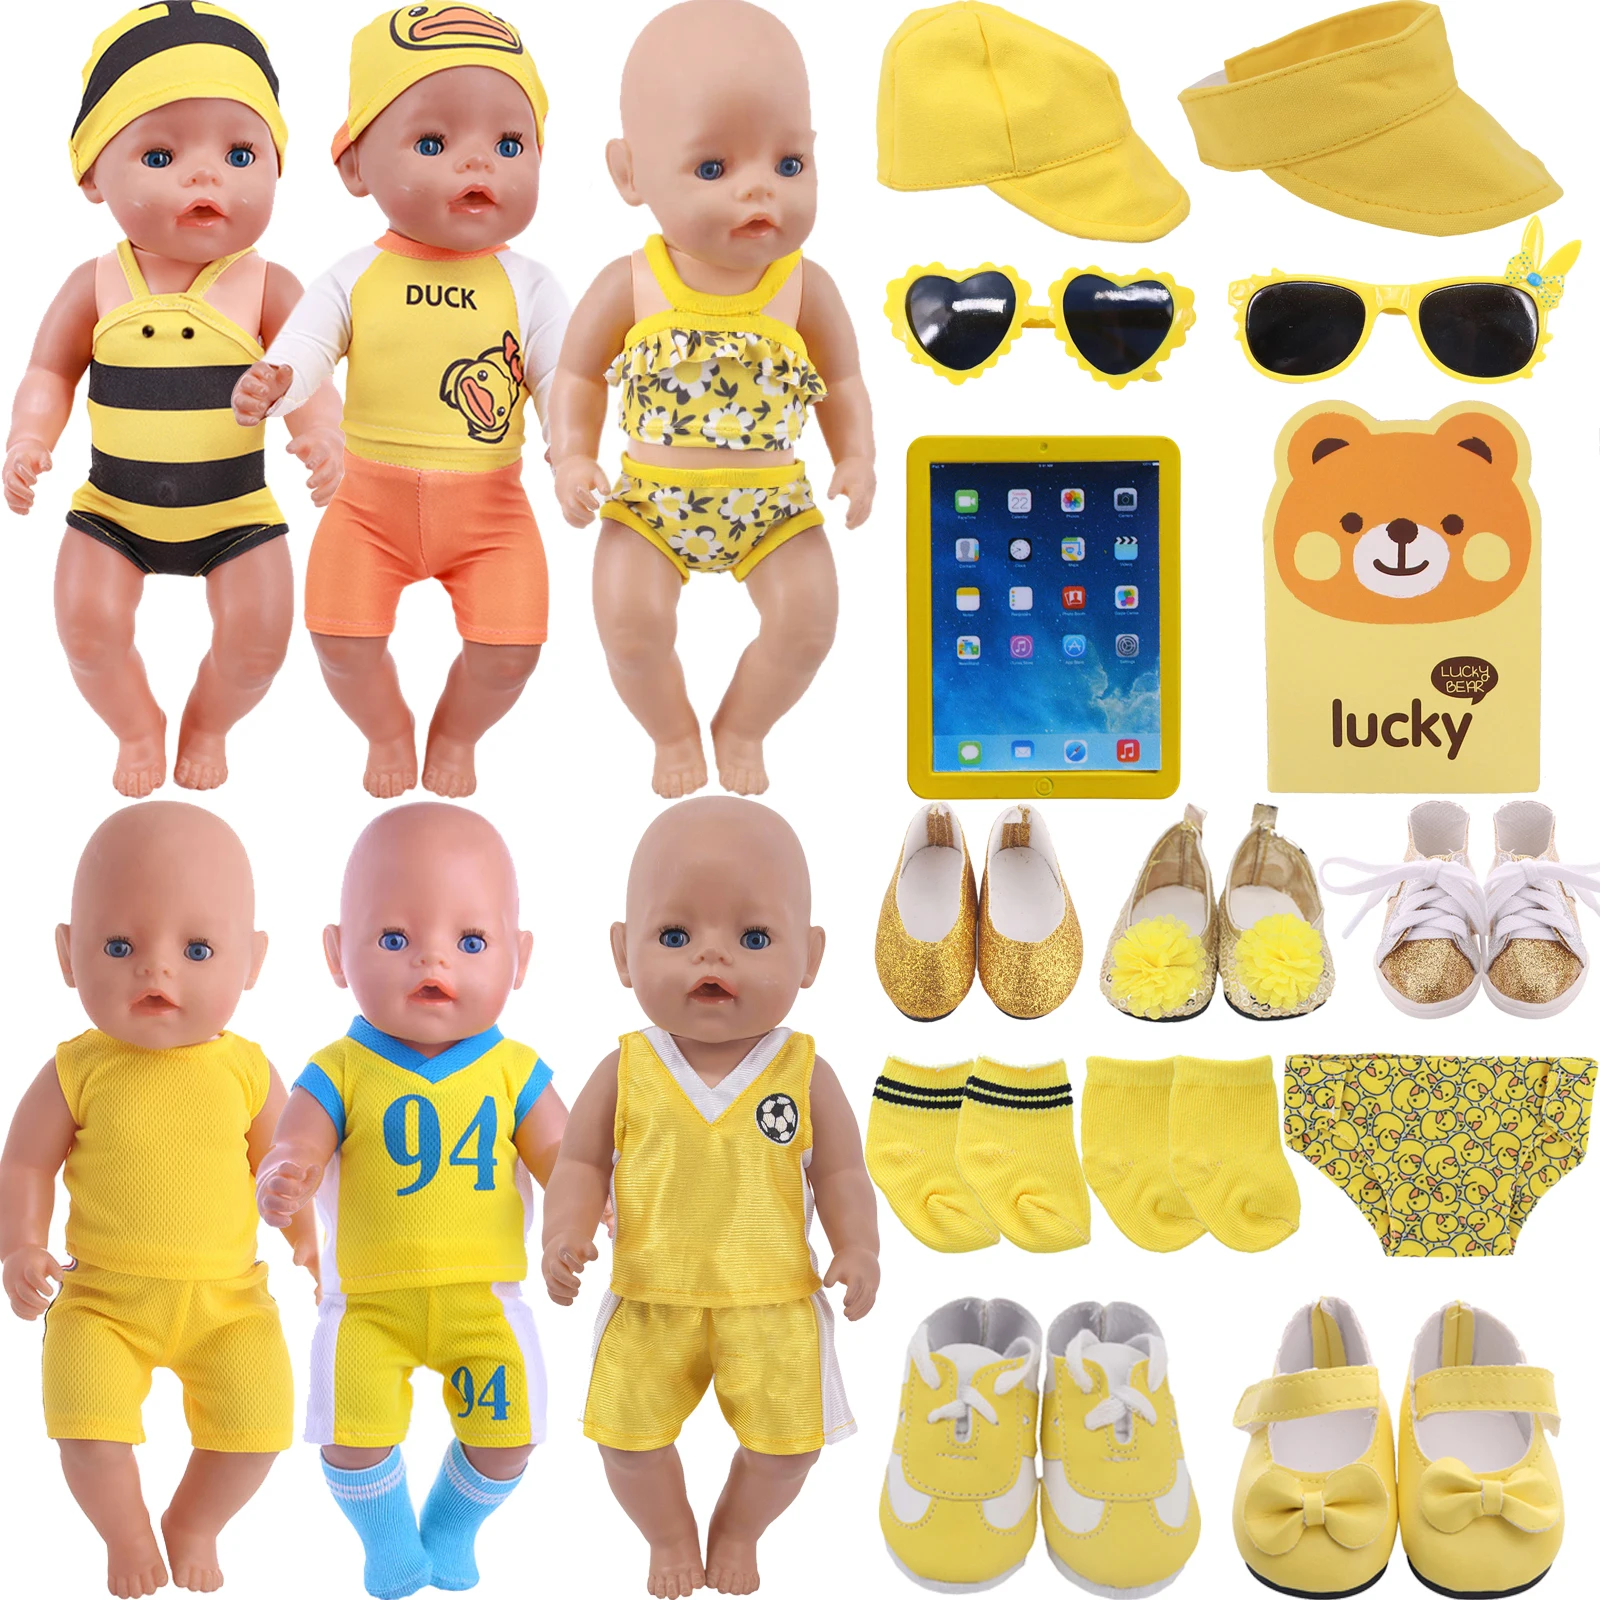 Doll Clothes Yellow Swimsuit,Sports Wear, Kitty Shoes For 18Inch Girl Of American&43 Cm Reborn Baby Doll Accessories,Generation